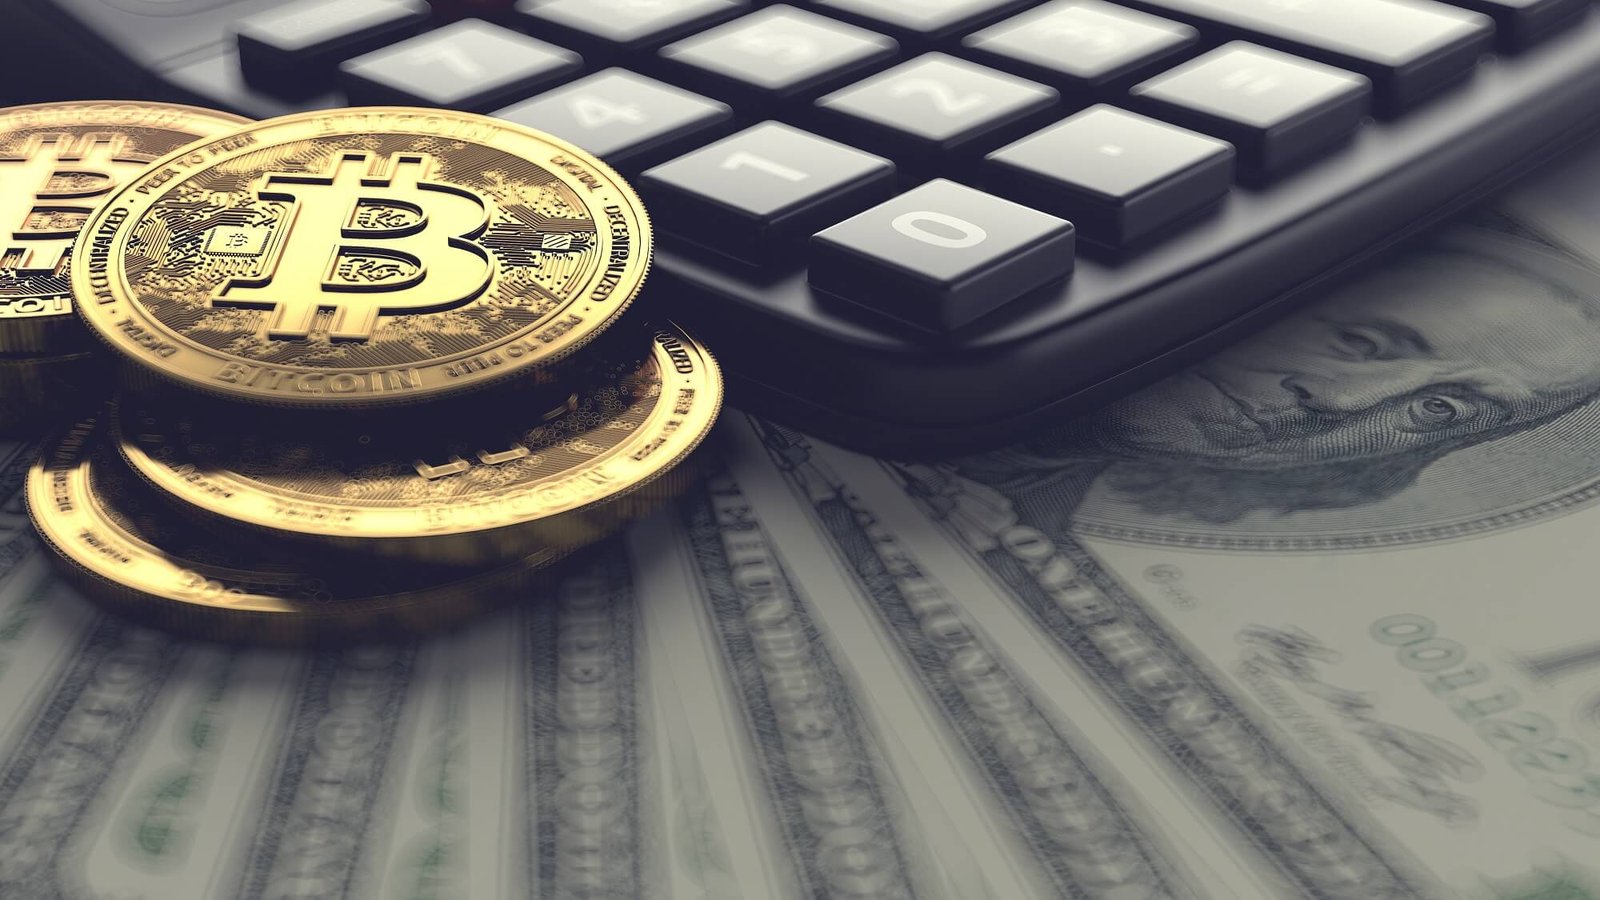 Sec filings reveal financial institutions interested in Bitcoin